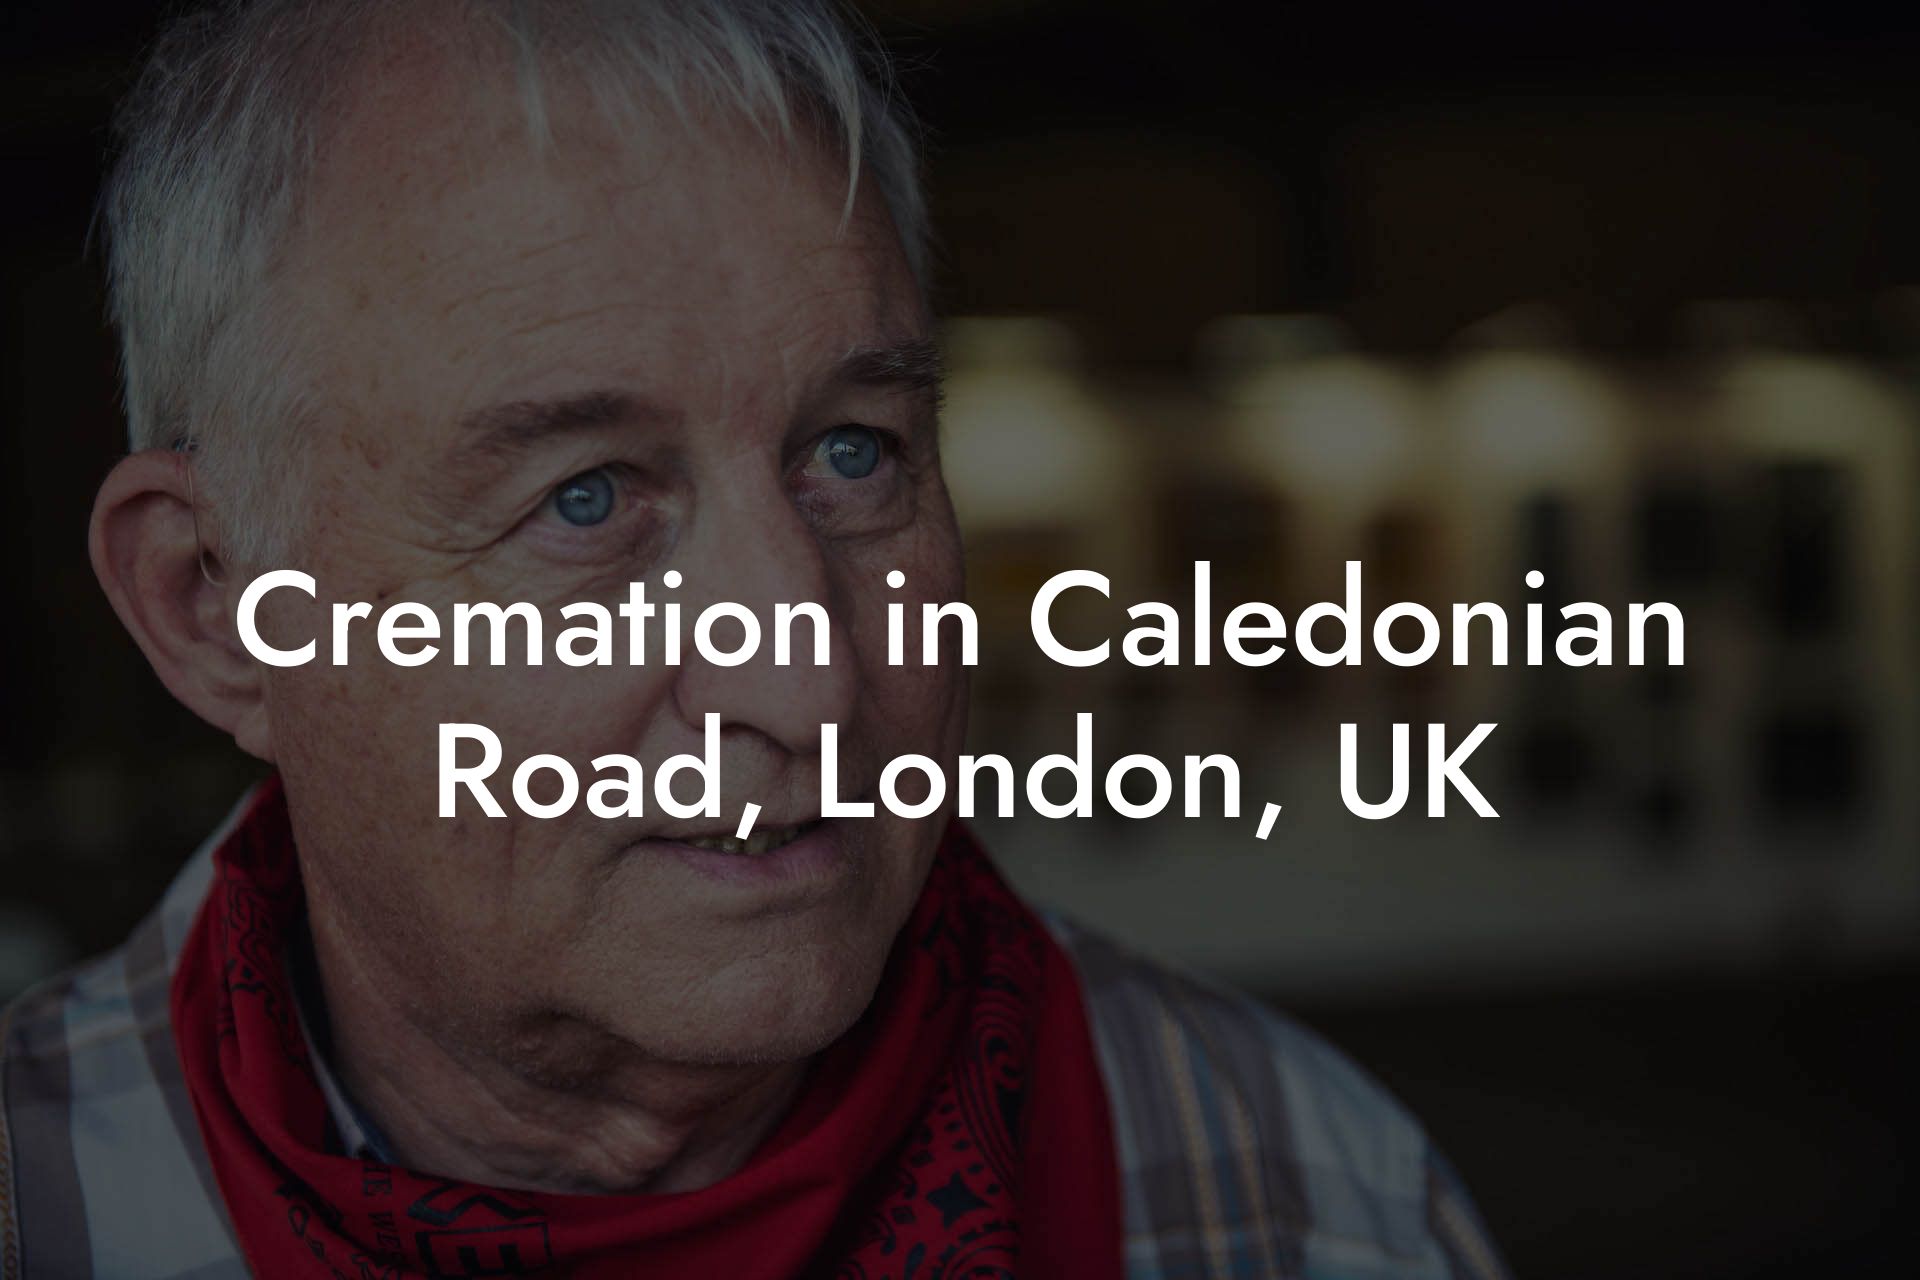 Cremation in Caledonian Road, London, UK